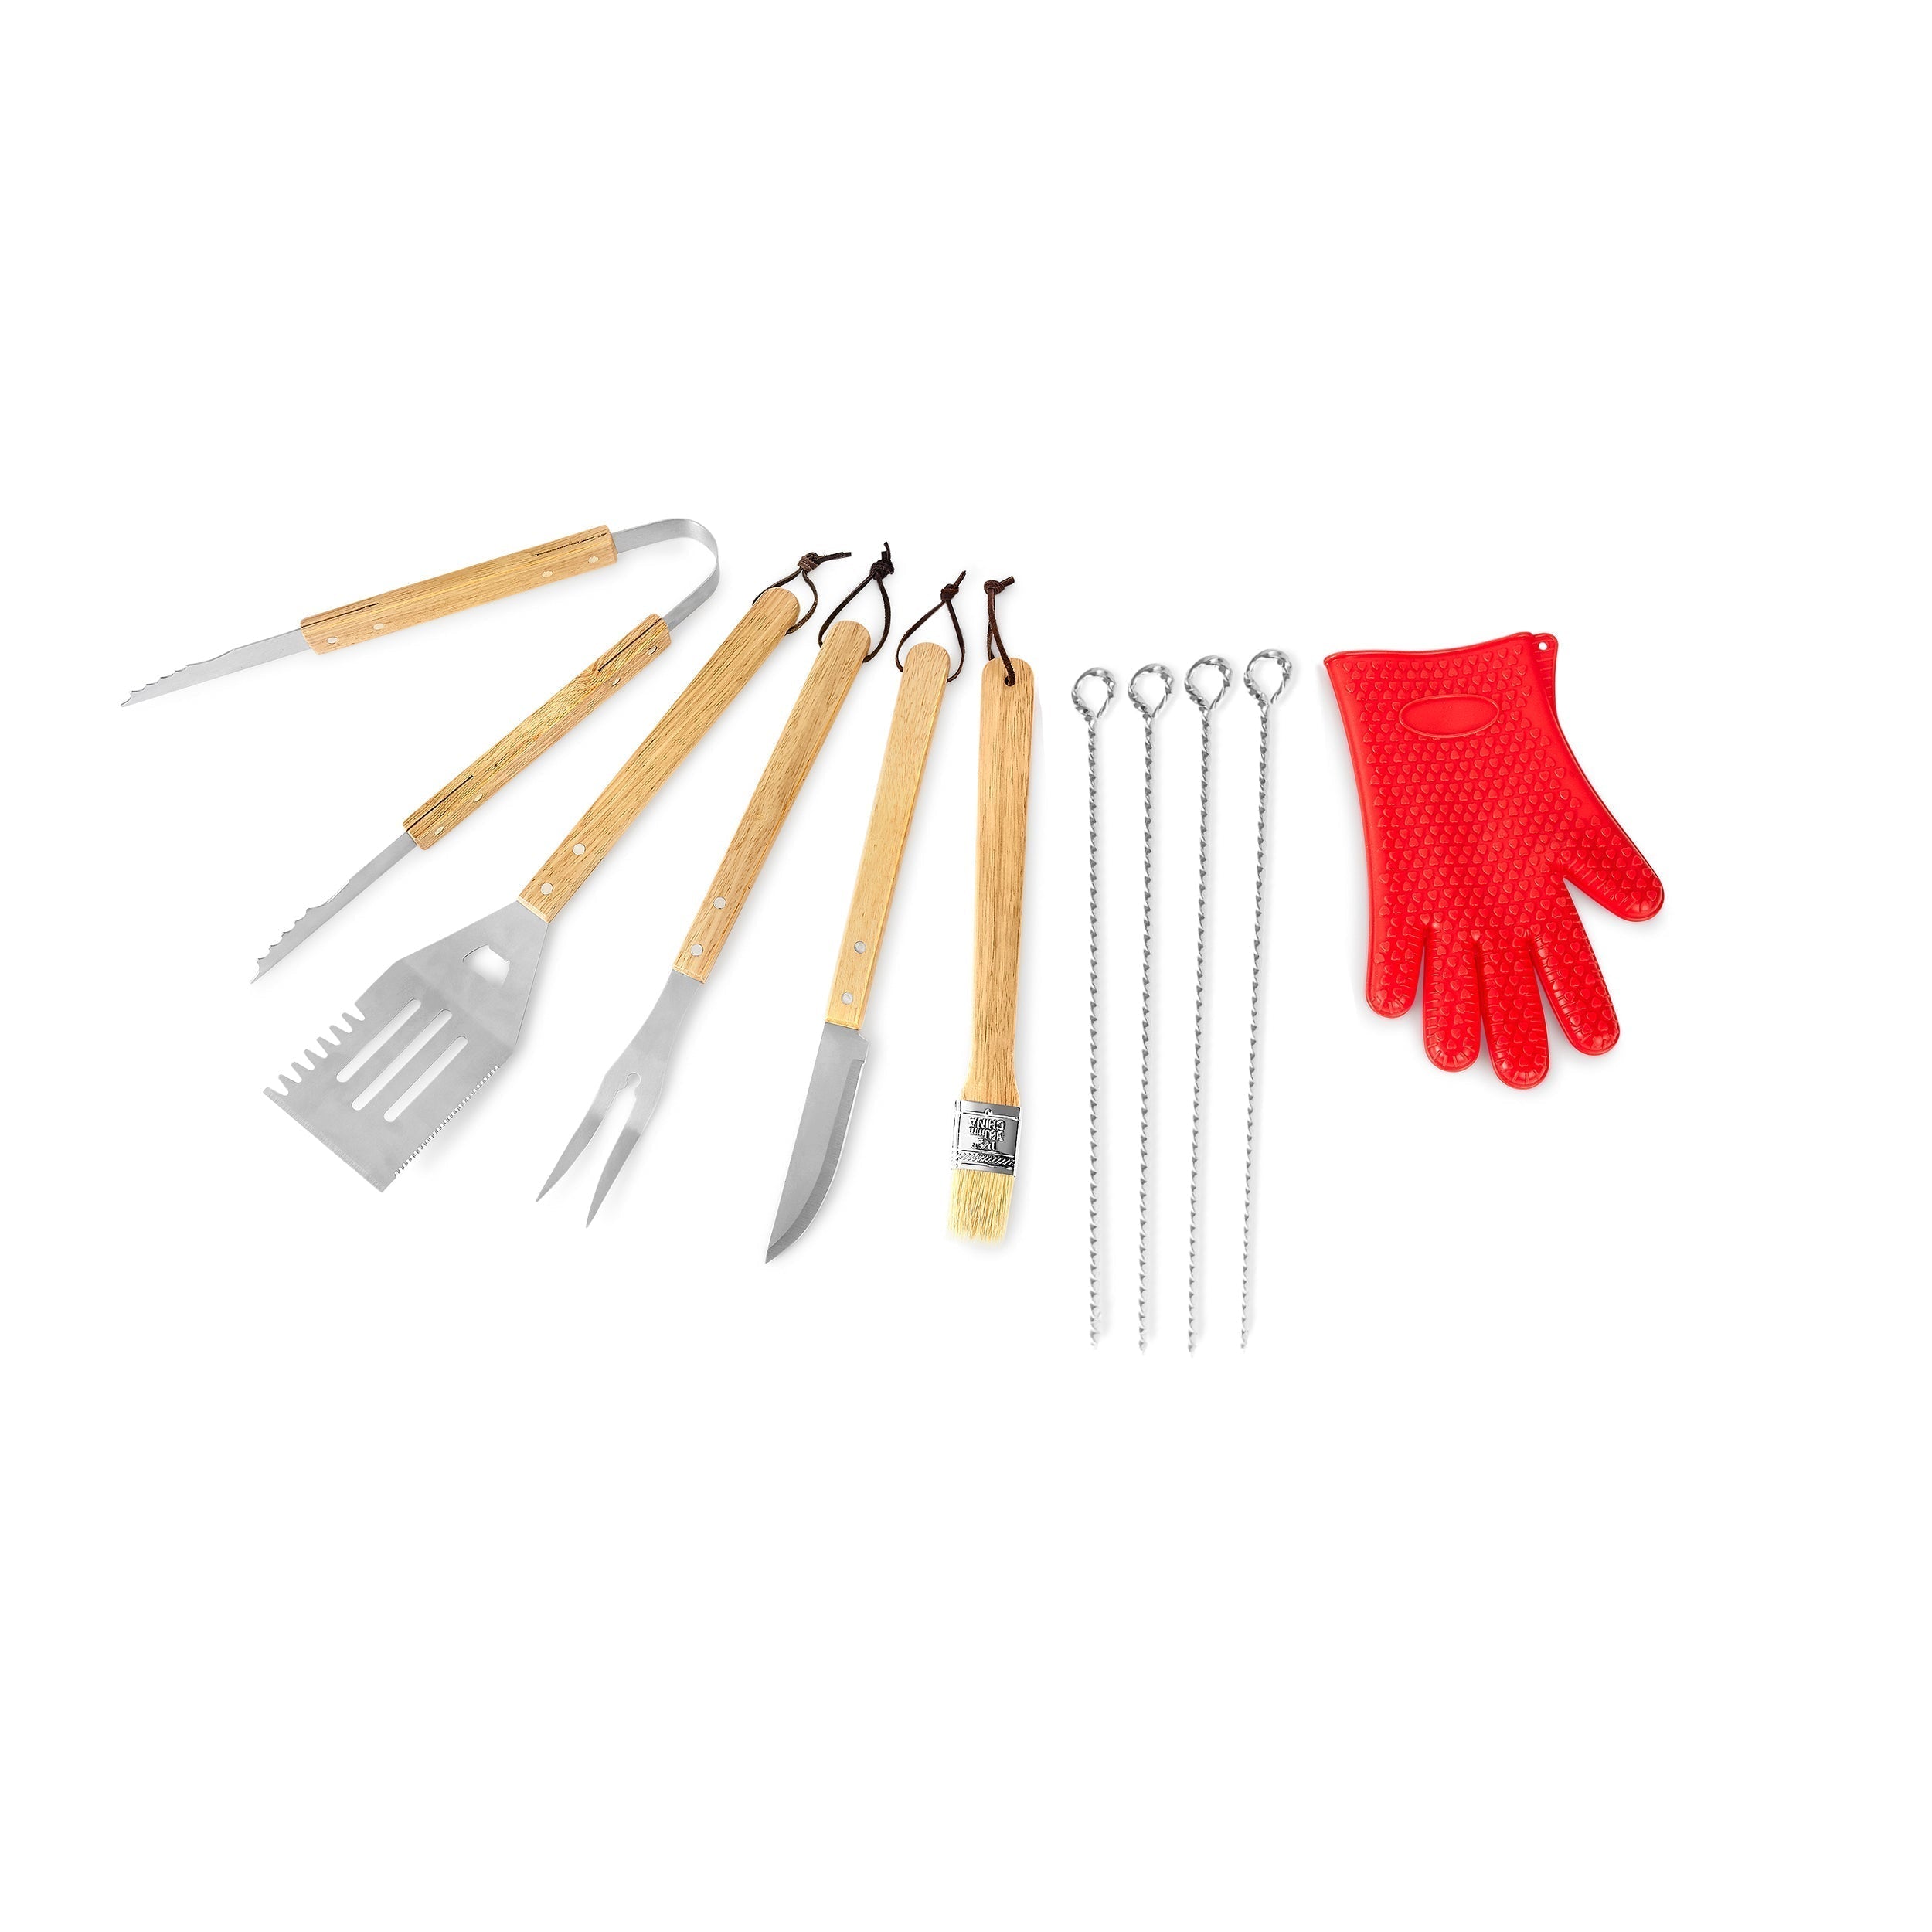 11 Piece BBQ Grill Set - Barbecue